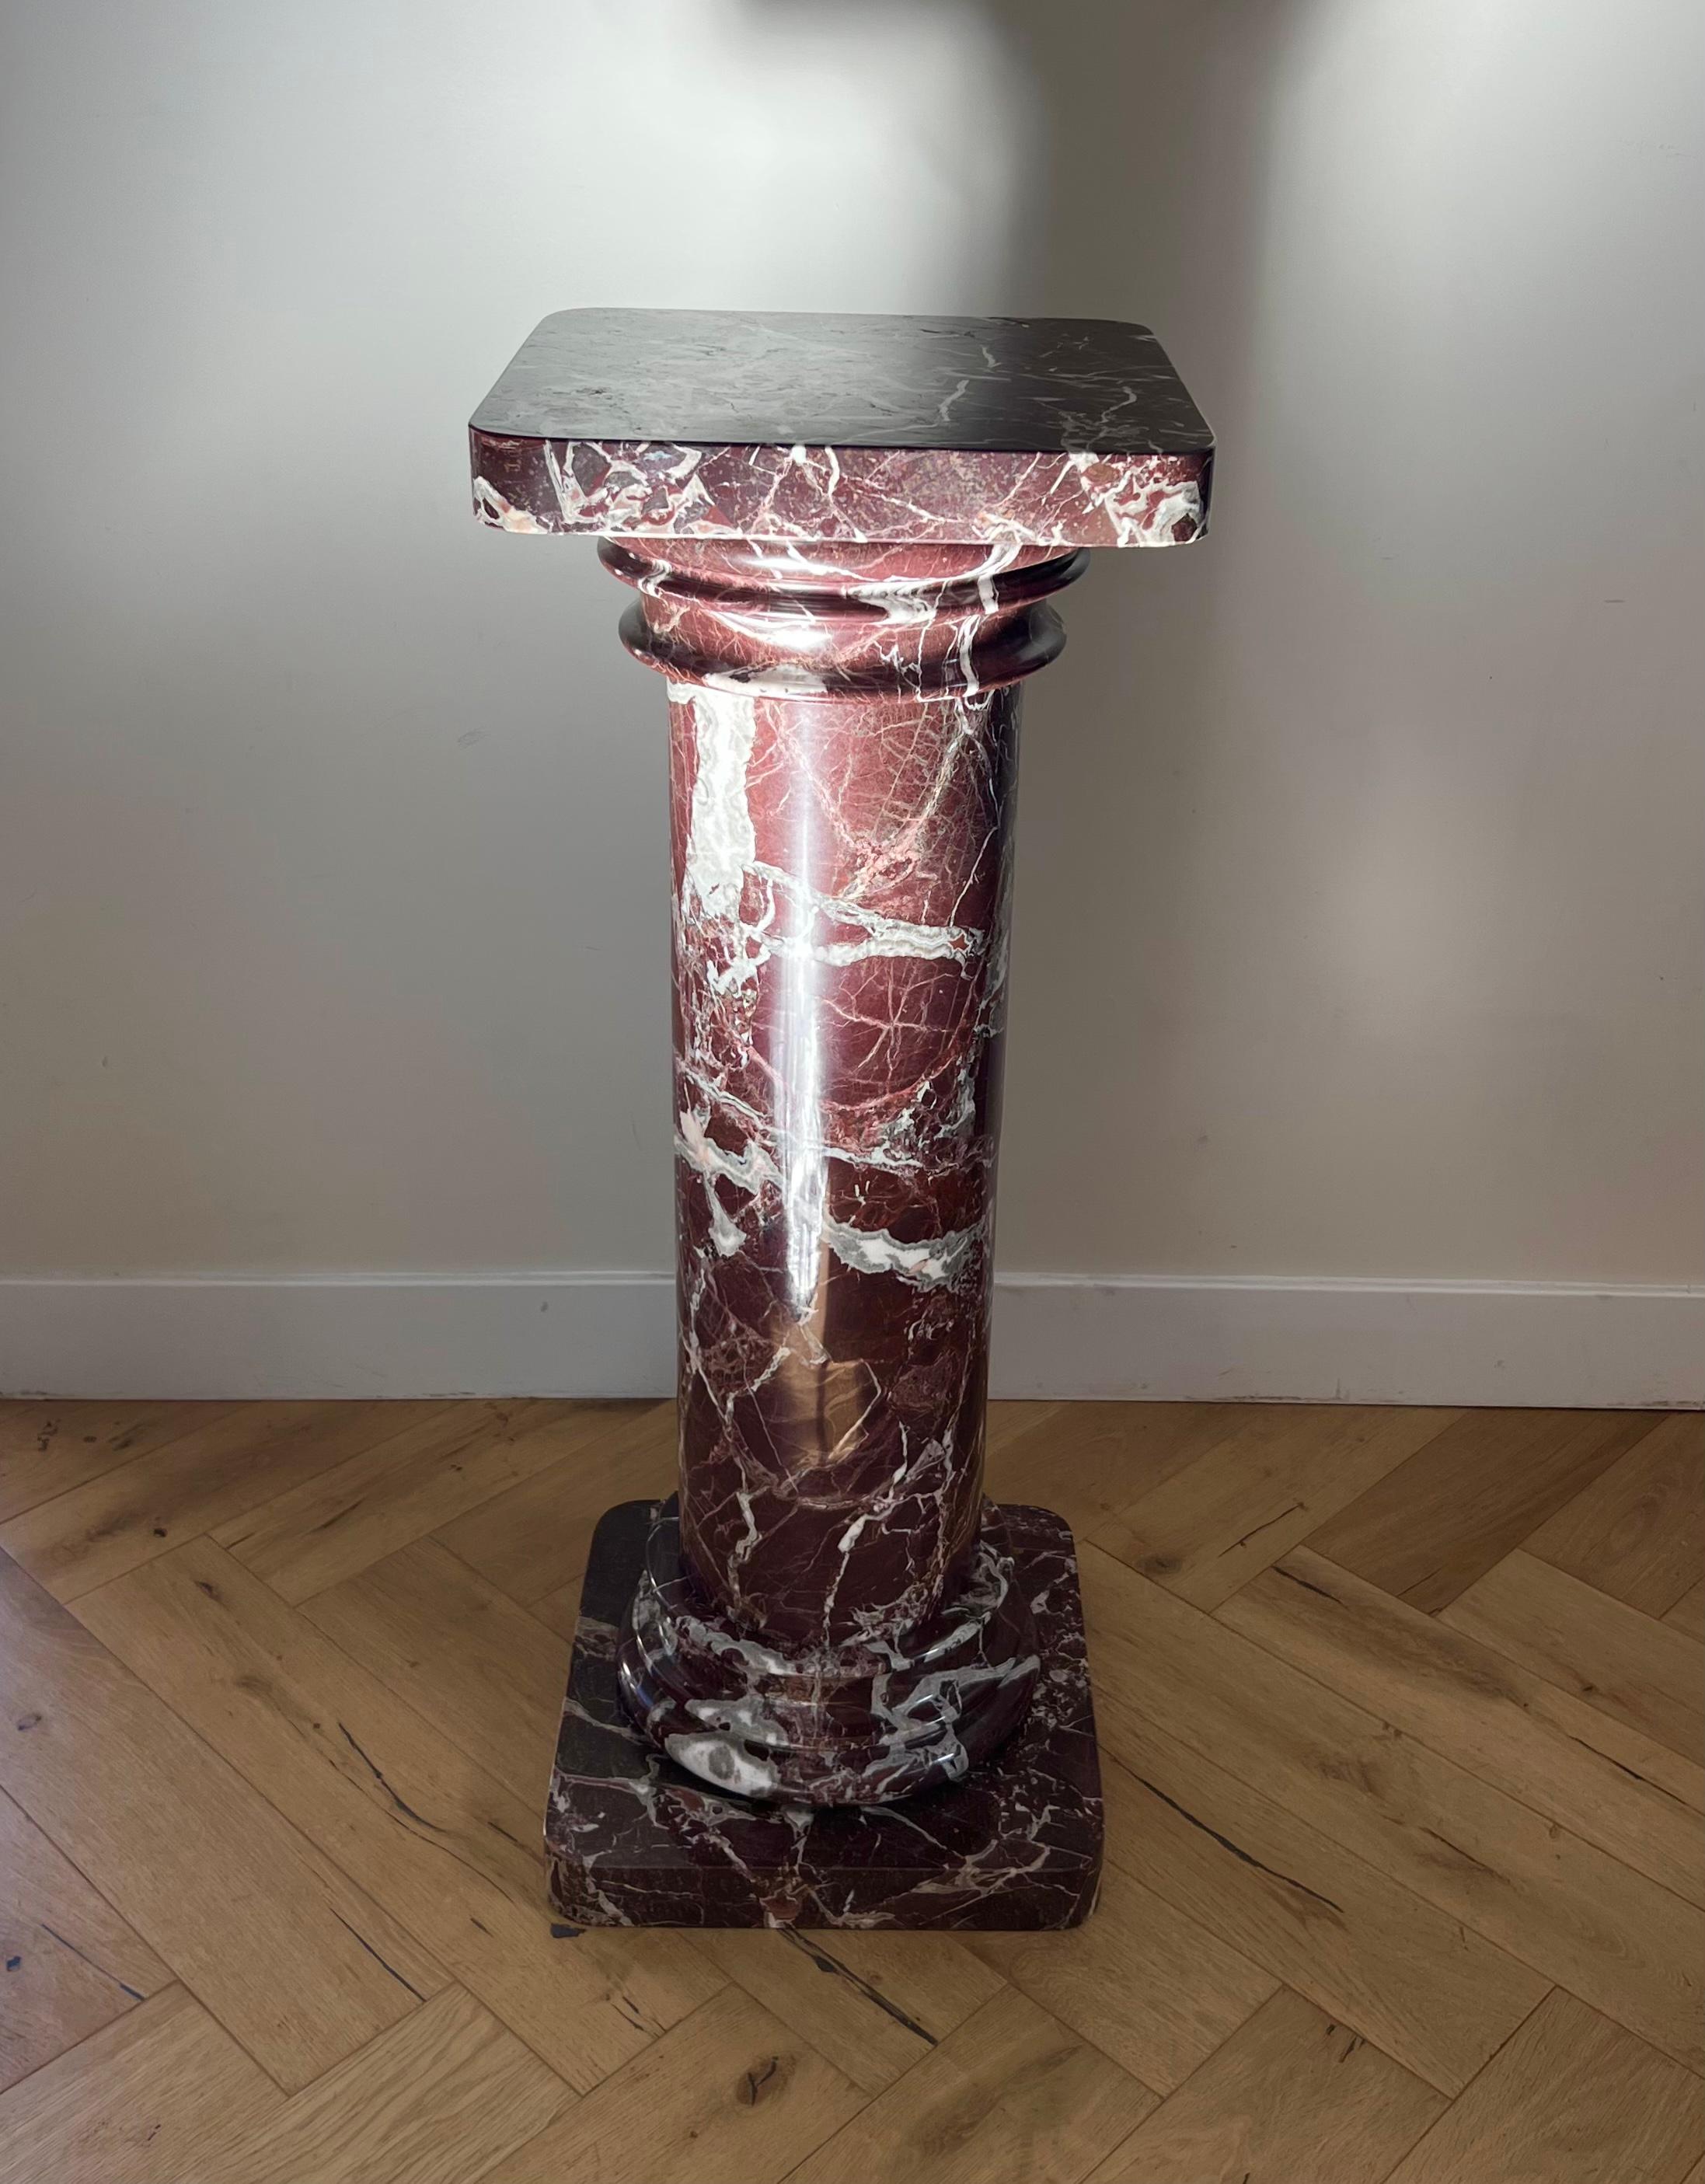 An extraordinarily striking vintage Italian rosso levanto marble pedestal, 20th century. Tones of oxblood, ivory, and dove gray. Neoclassical in form, this column actually disassembles into five pieces for storage and transport. The top piece merely